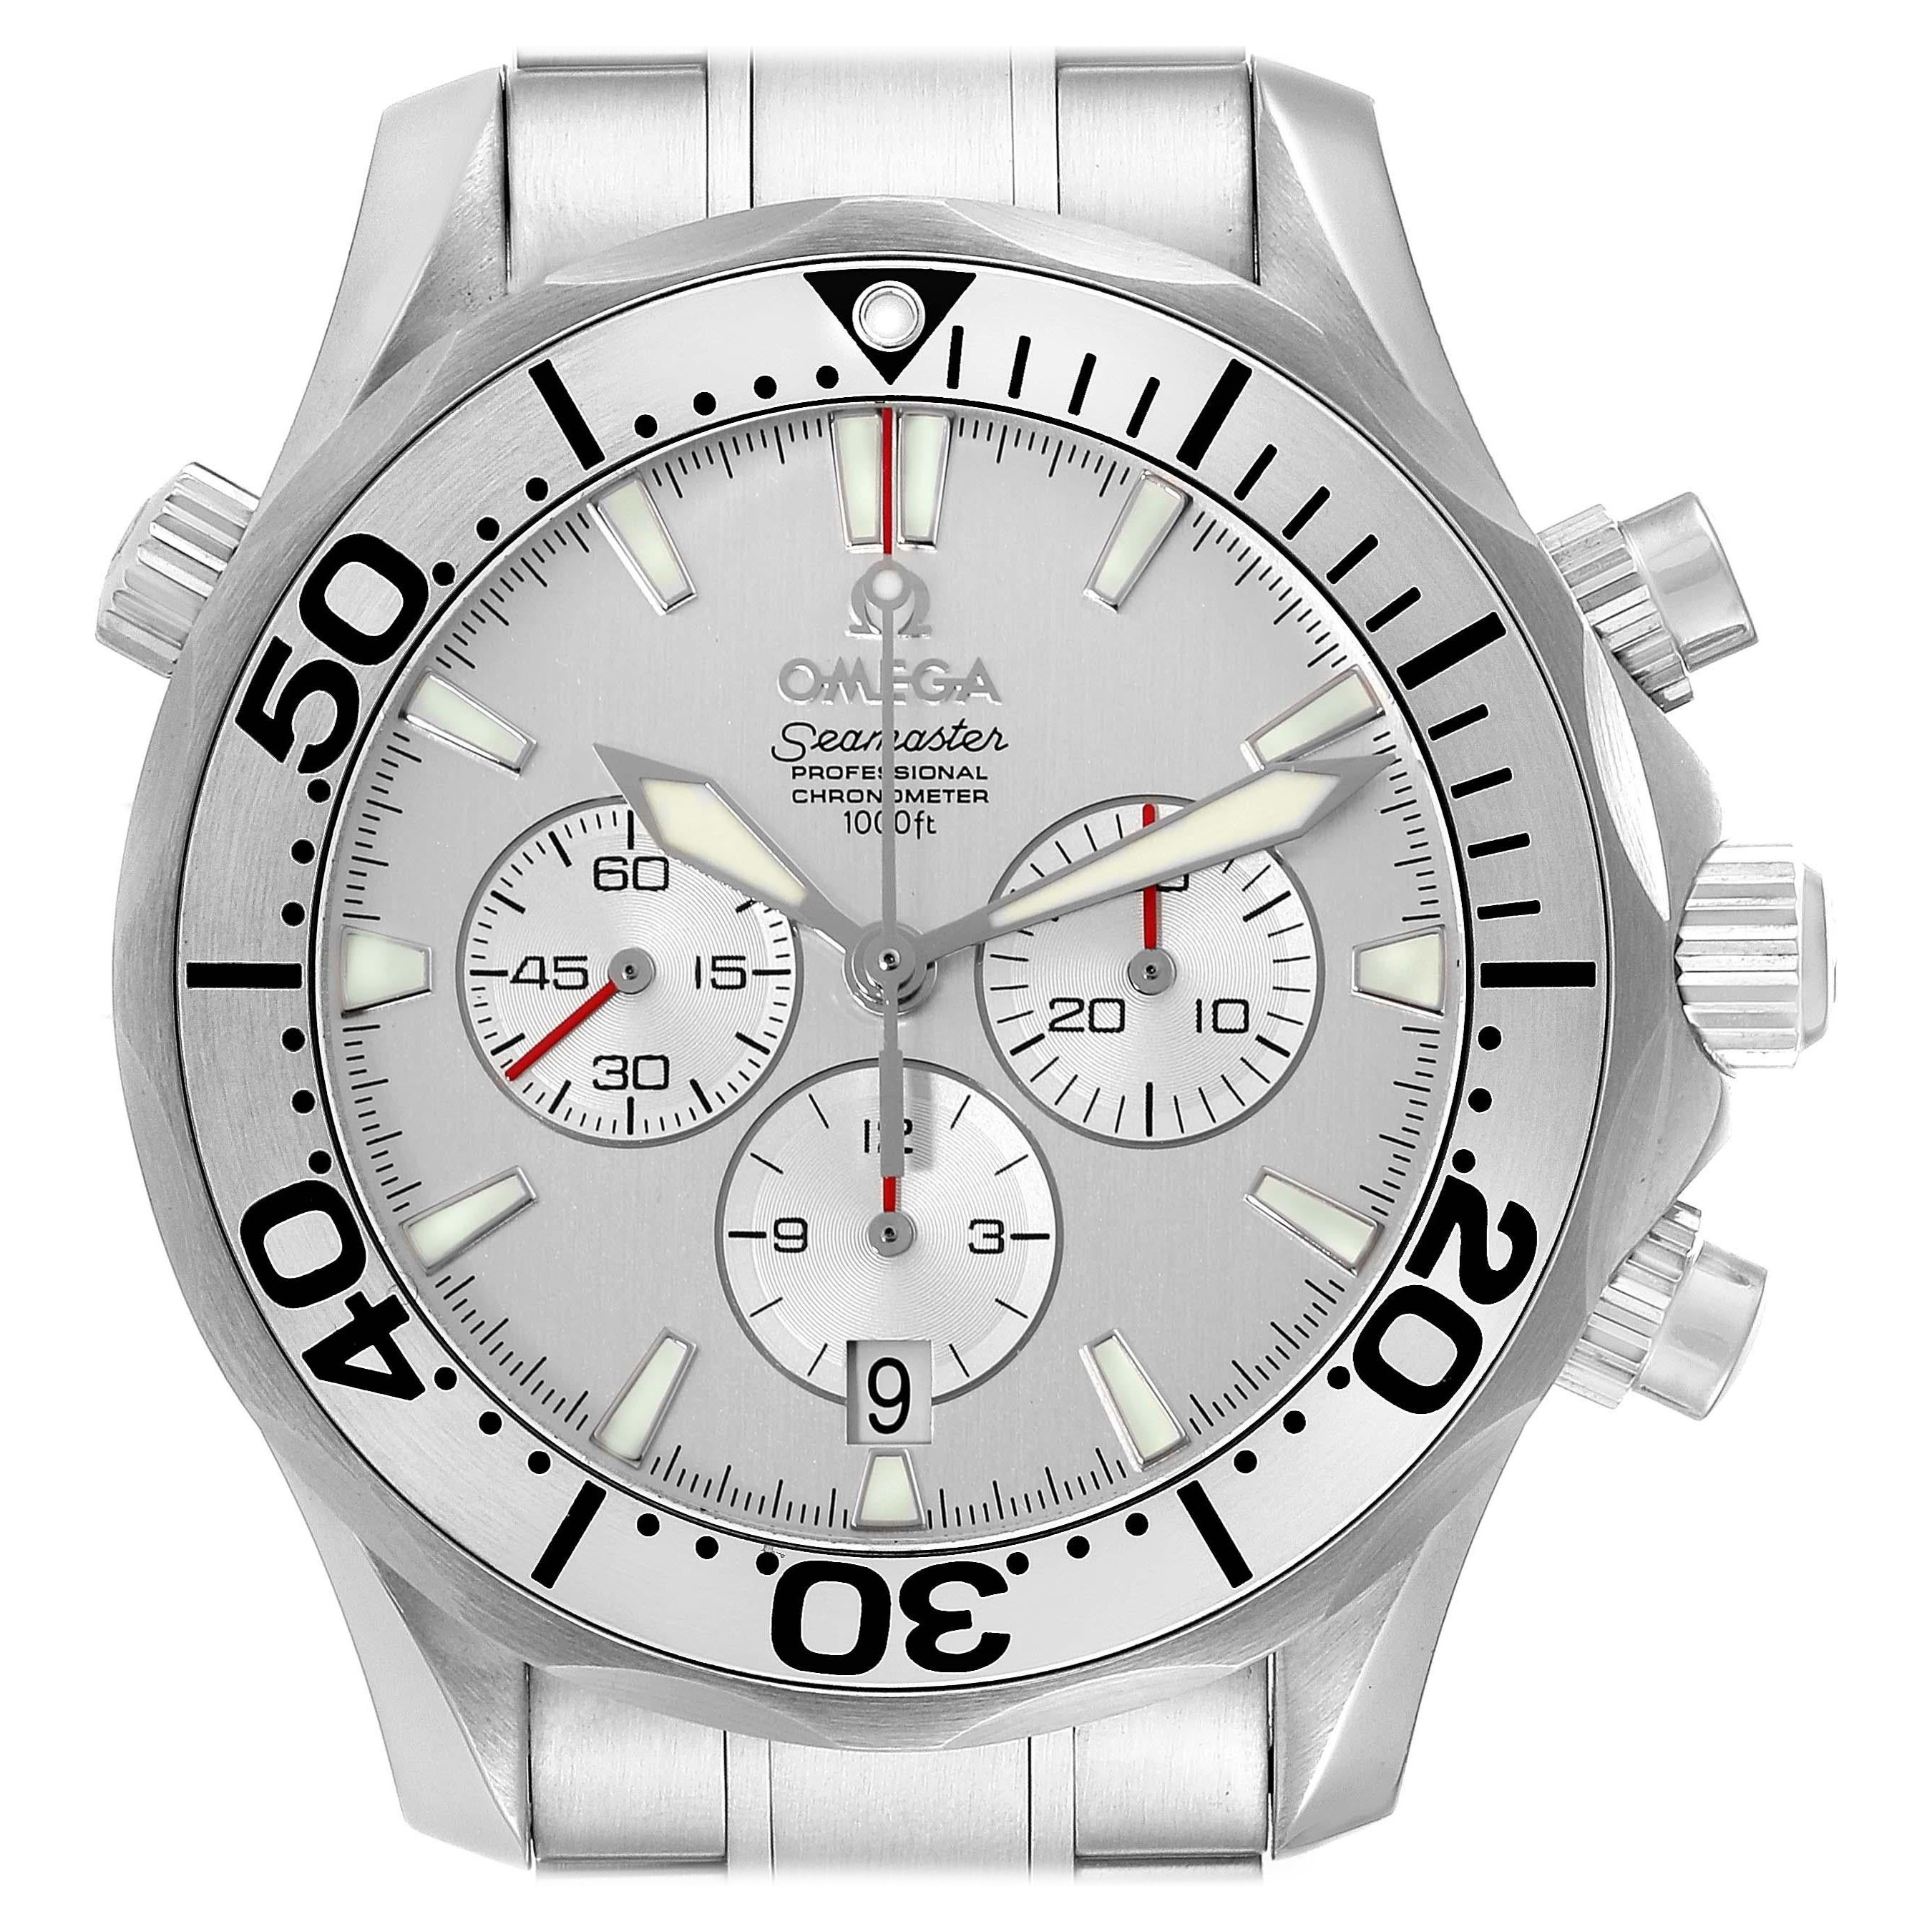 Omega Seamaster Special Edition Chronograph Watch 2589.30.00 Box Card For Sale